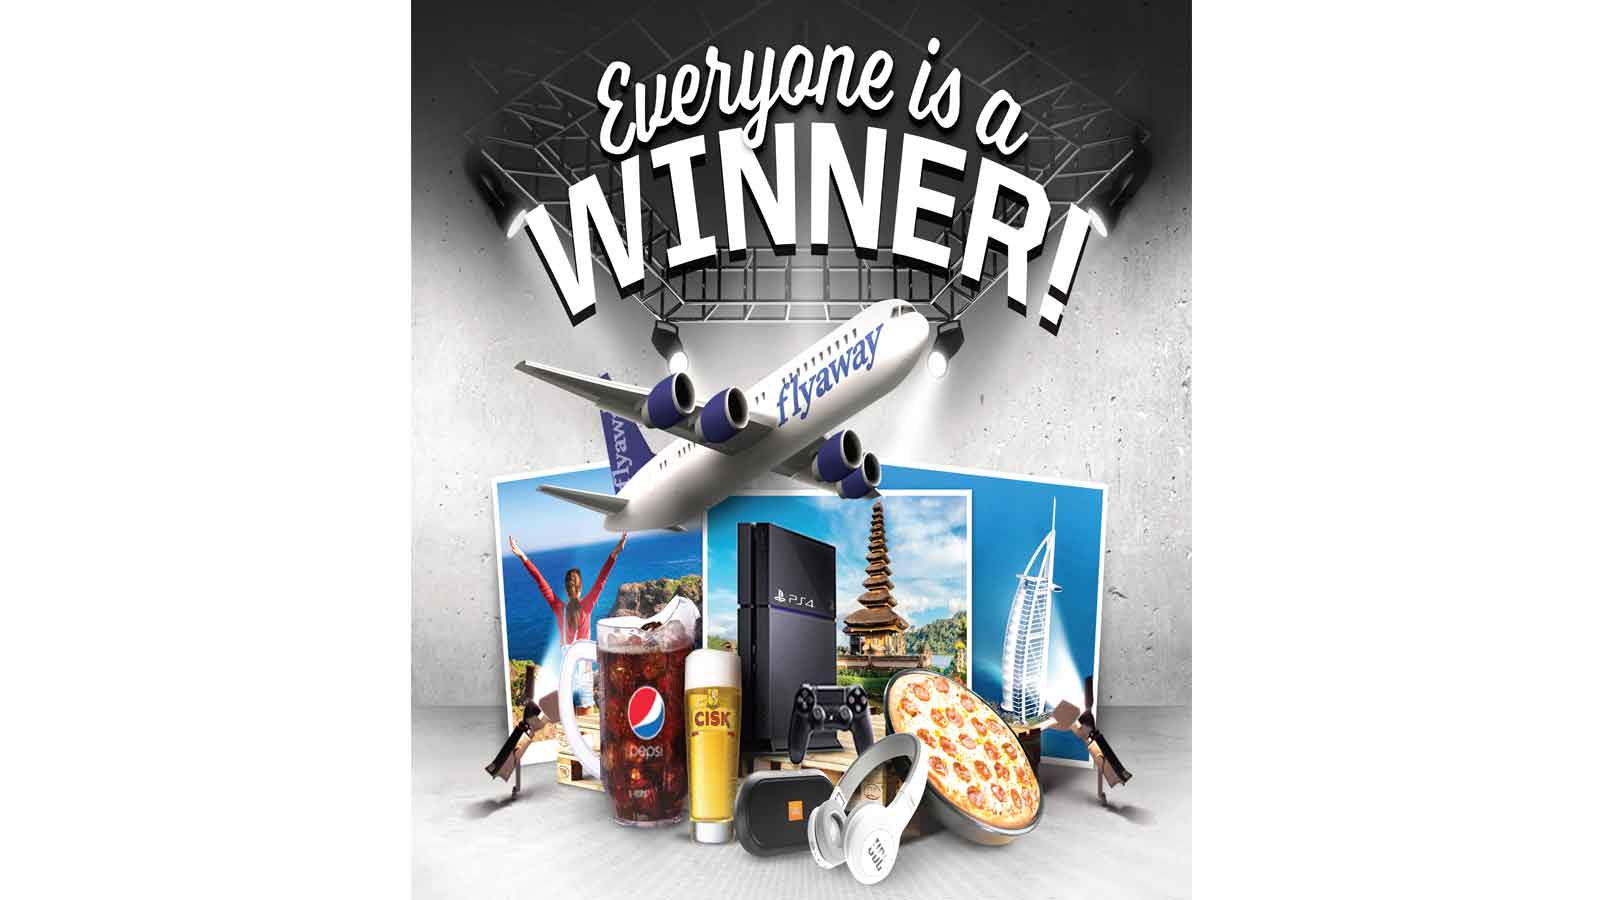 ‘Everyone is a winner’ campaign back at Pizza Hut